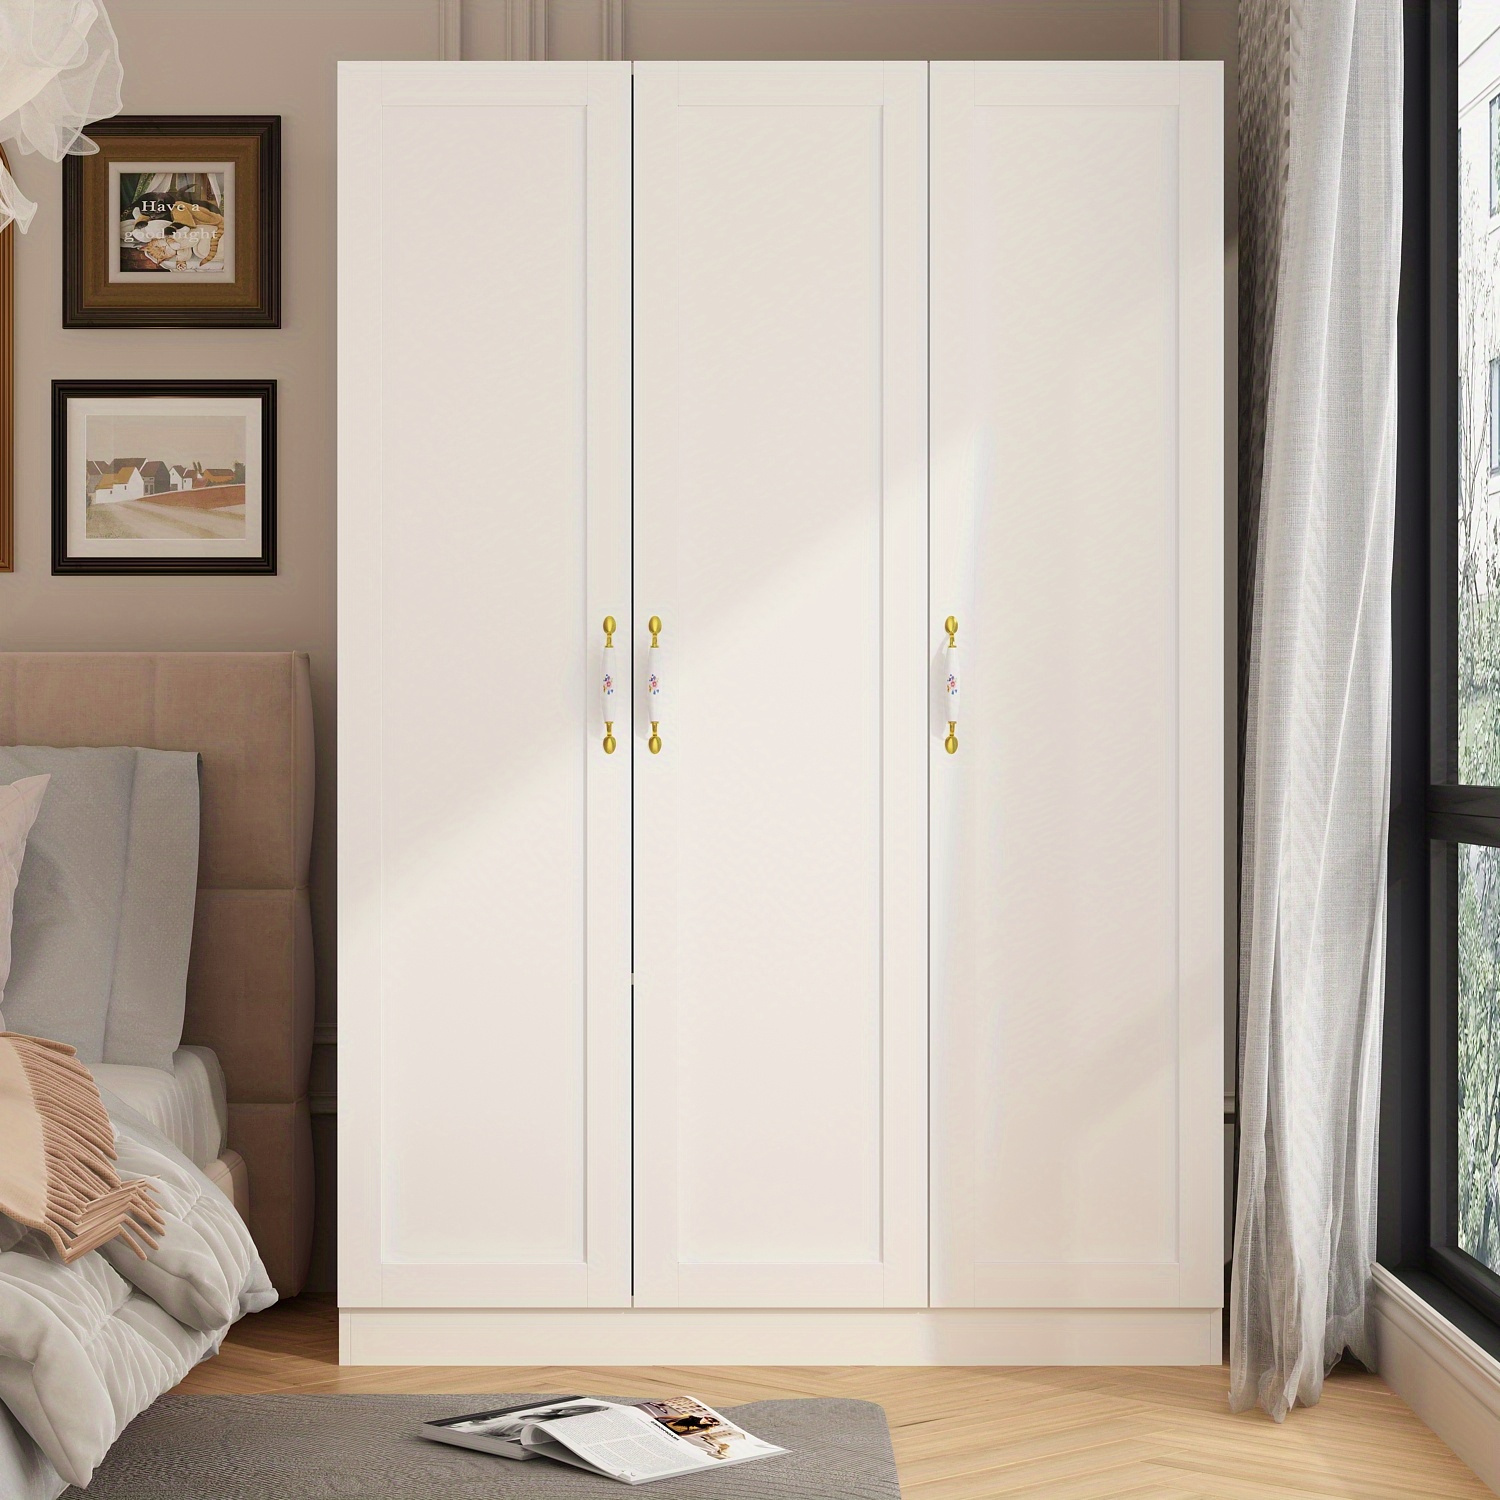 

Large Wardrobe Armoire Wooden Closet With 3 Doors, 5 Storage Compartments, 2 Hanging Rods & Decorative Handles For Bedroom, White